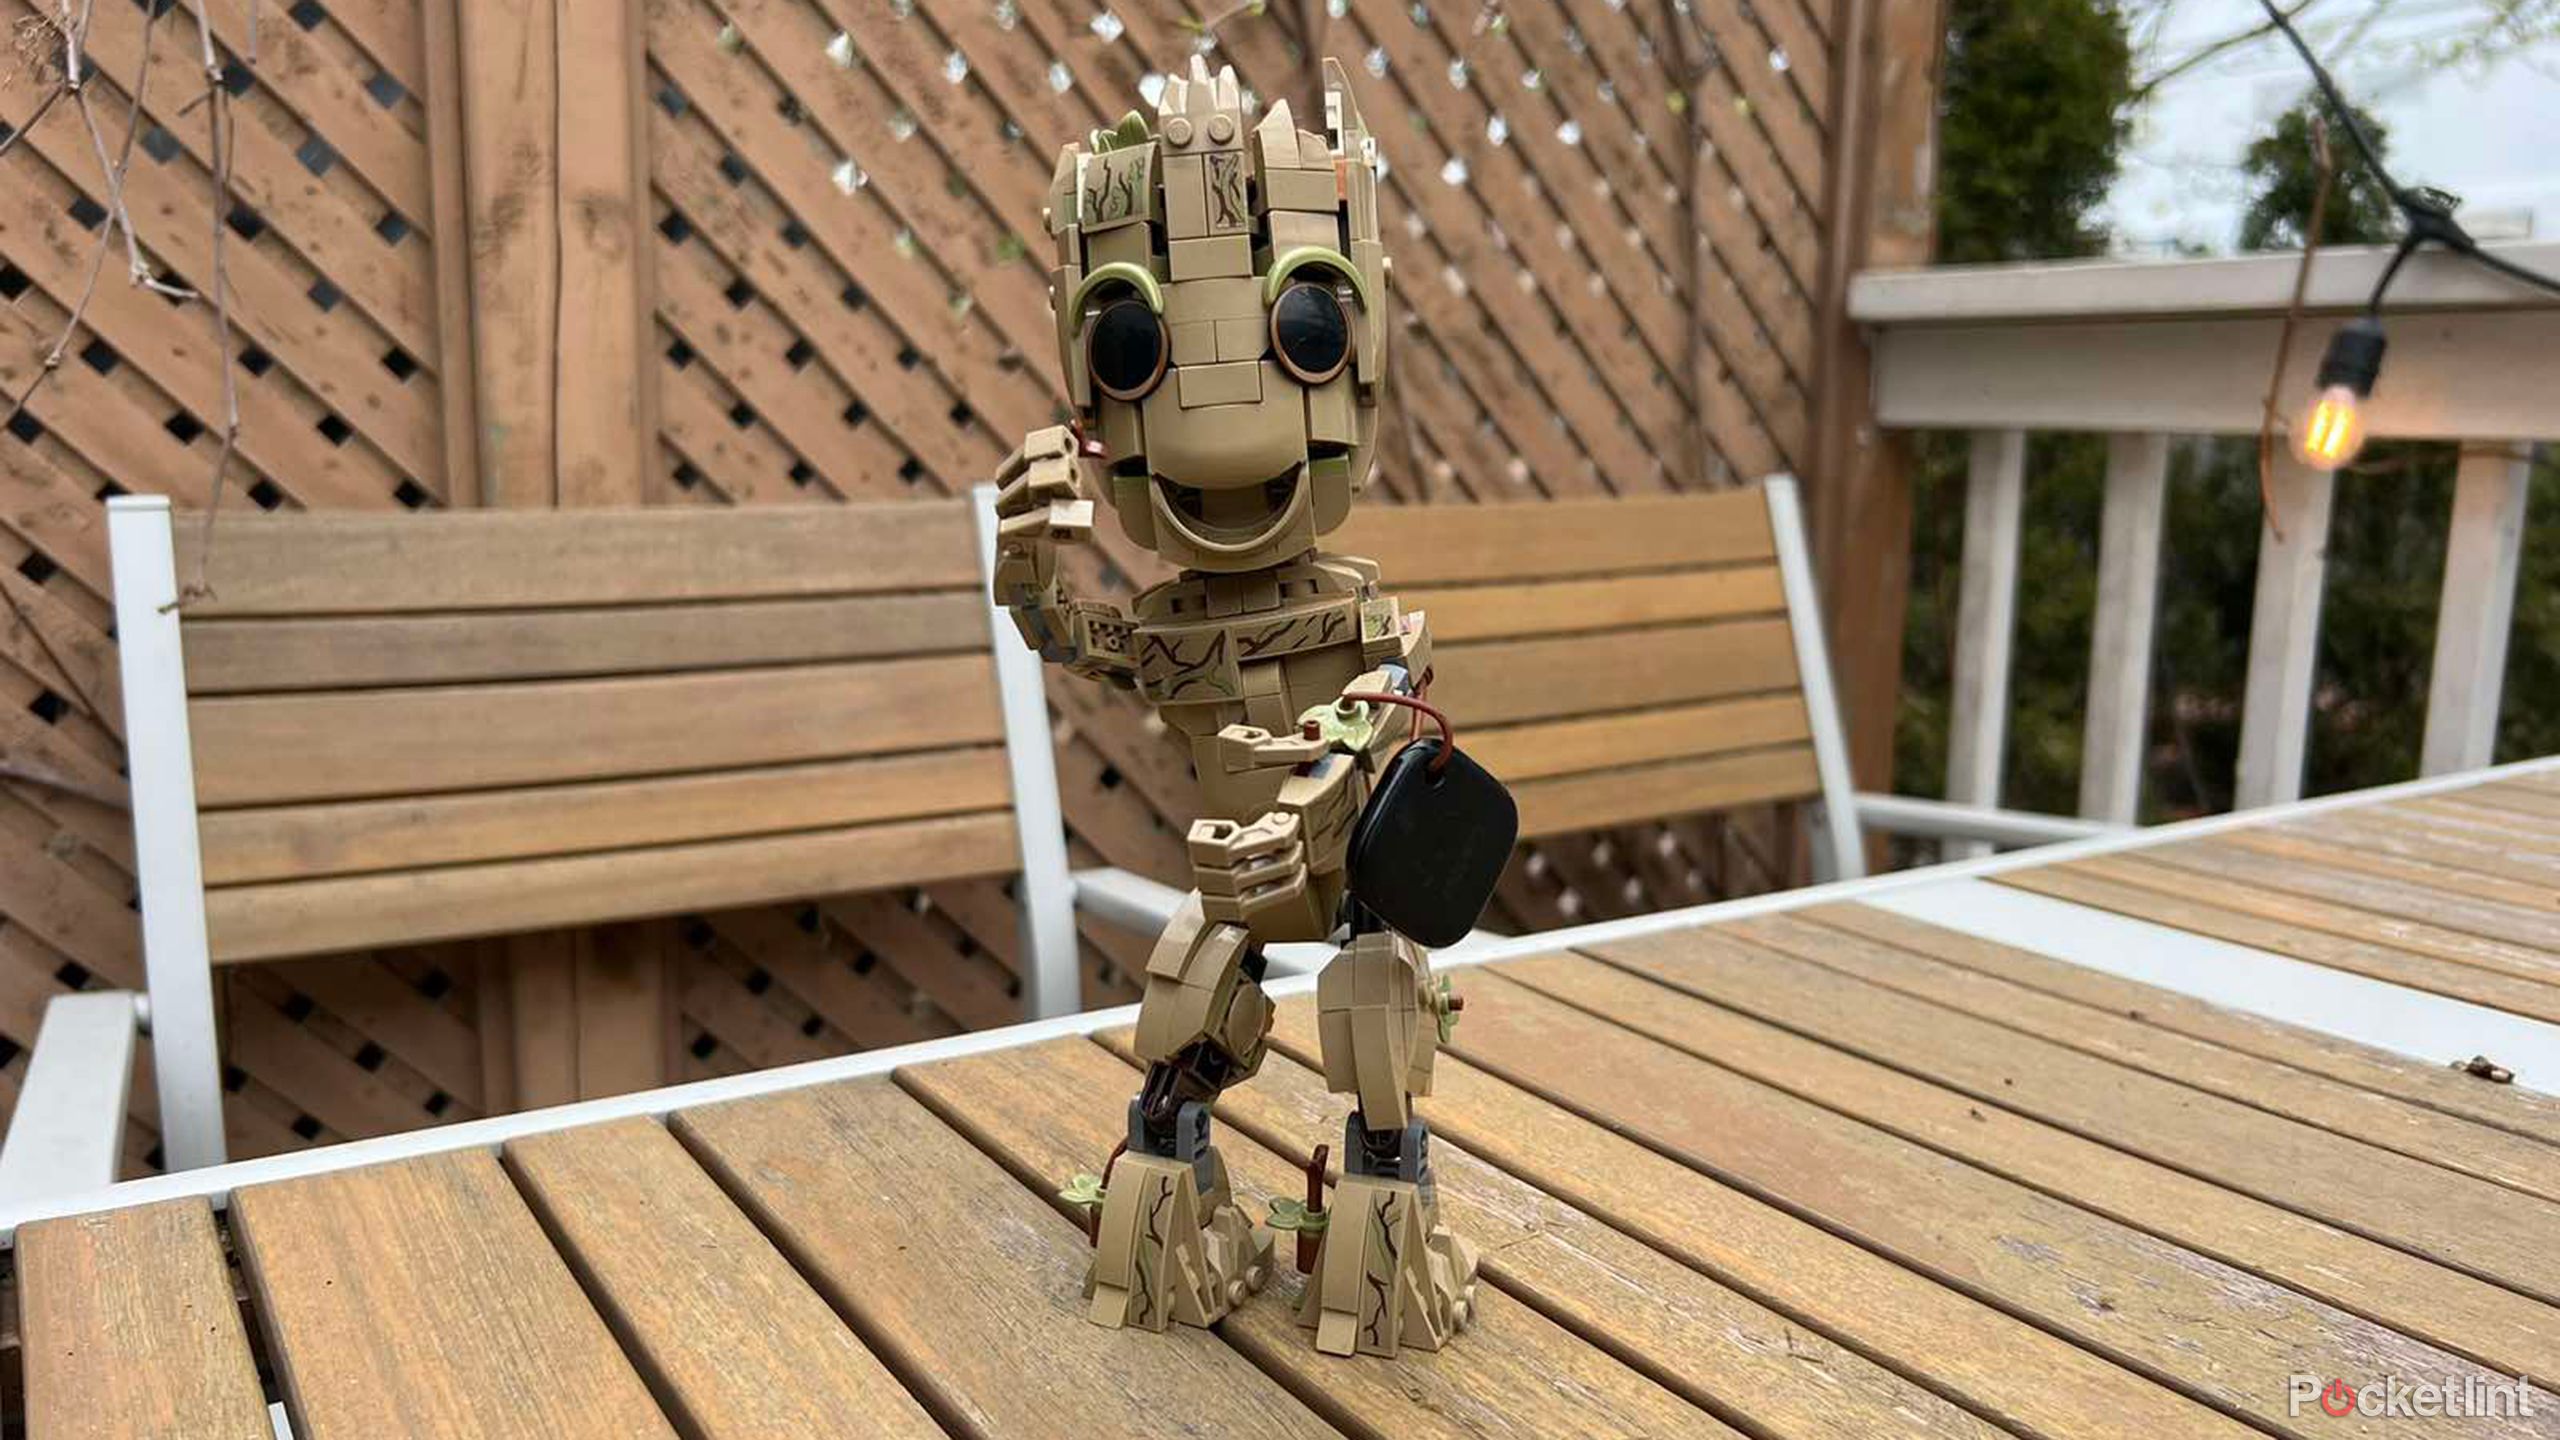 Eufy smartlink tracker with Baby Groot